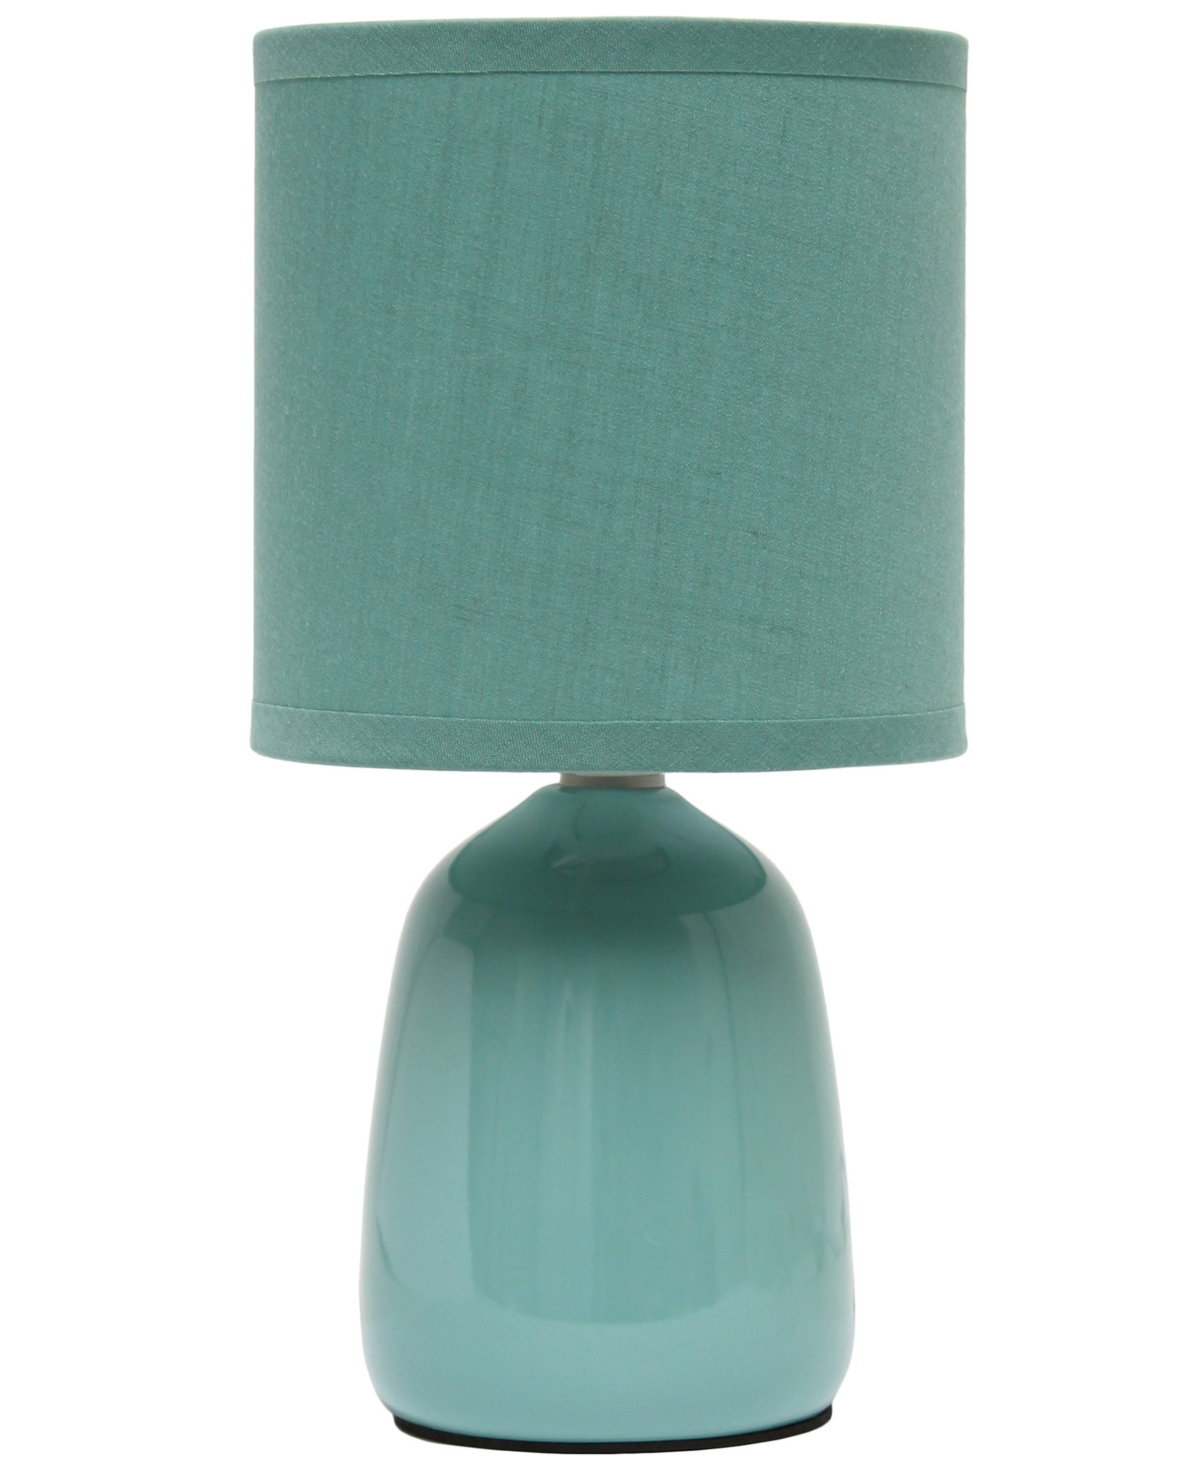 Shop Simple Designs 10.04" Tall Traditional Ceramic Thimble Base Bedside Table Desk Lamp With Matching Fabric Shade In Seafoam Green